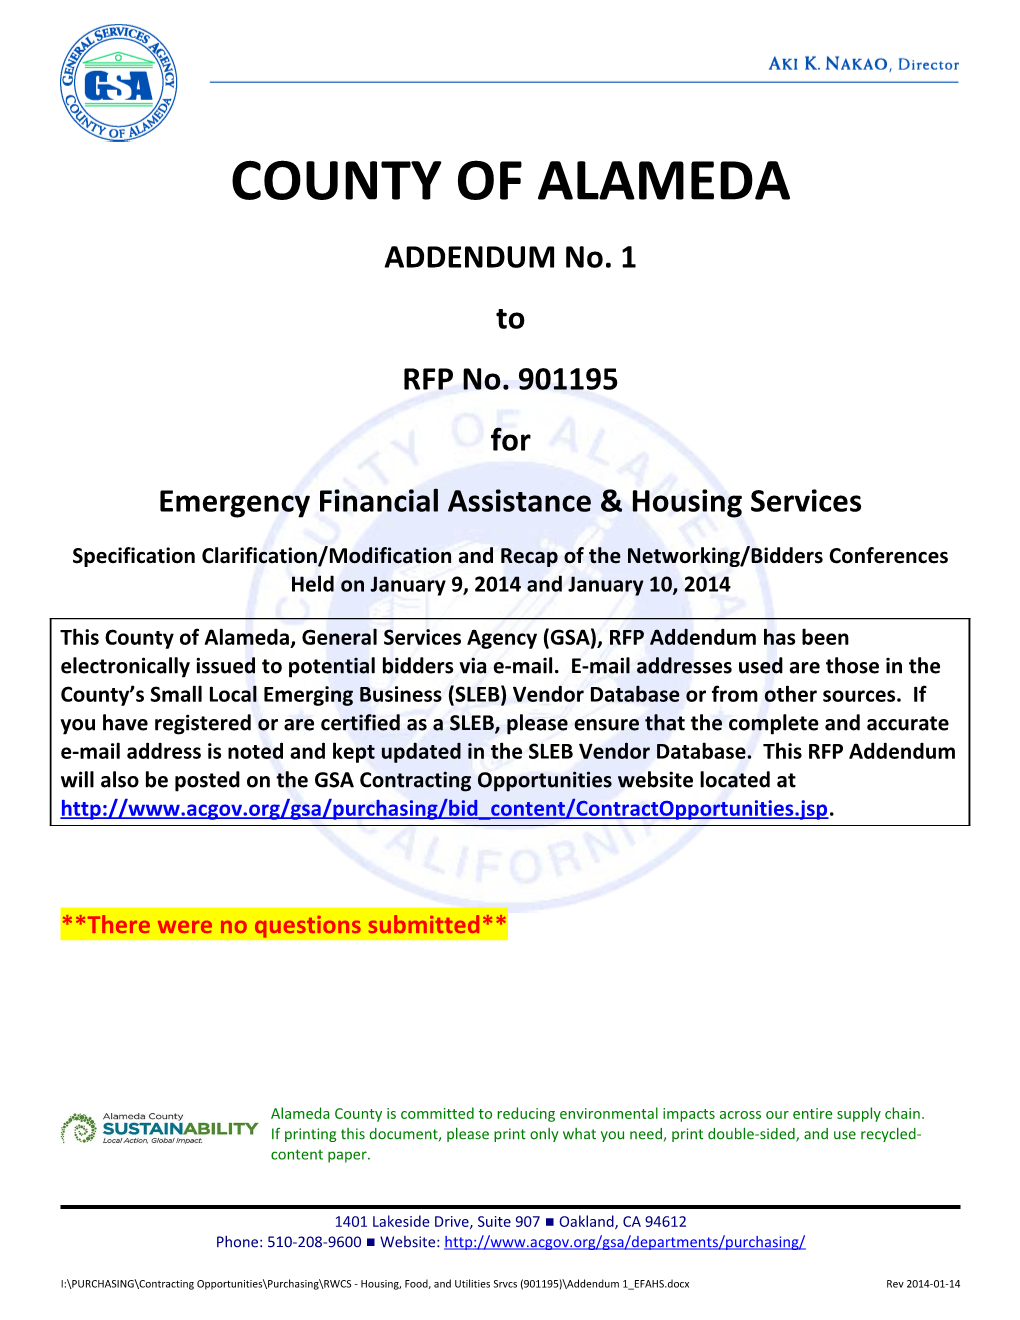 Emergency Financial Assistance & Housing Services